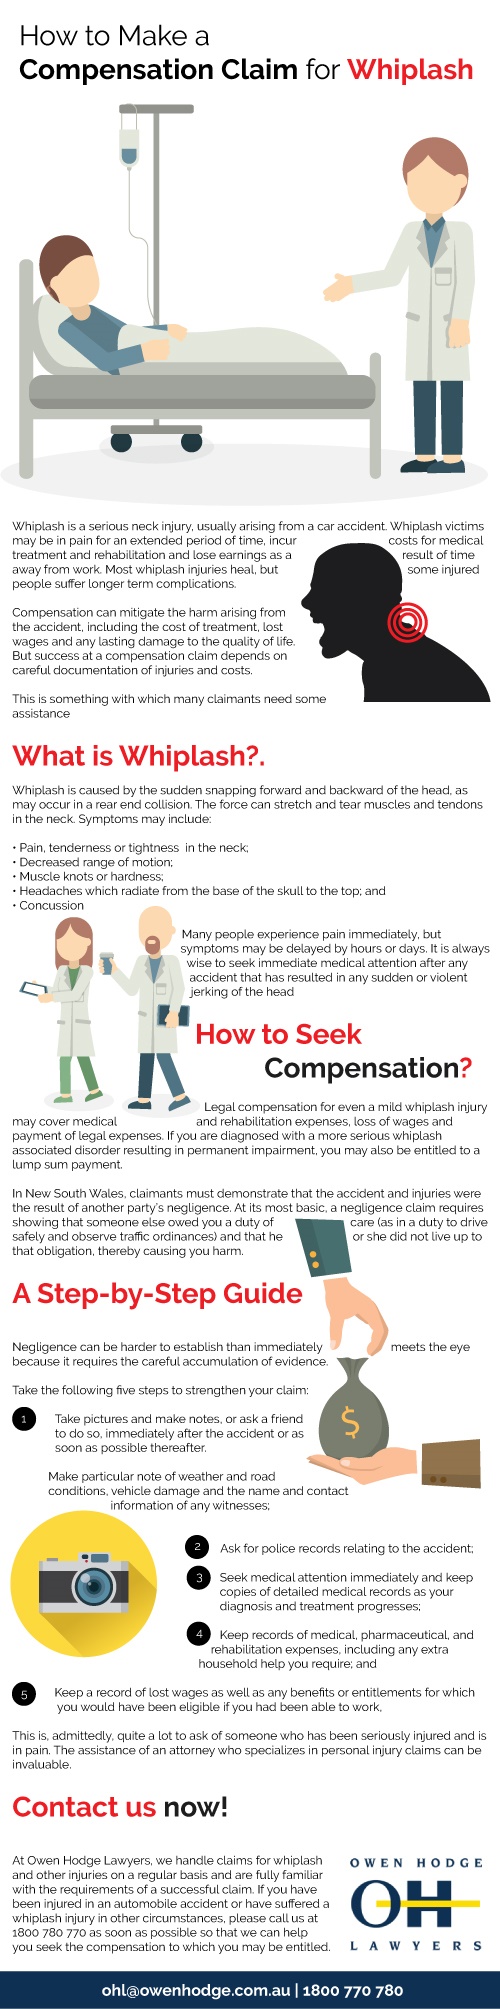 how to claim for whiplash after car accident